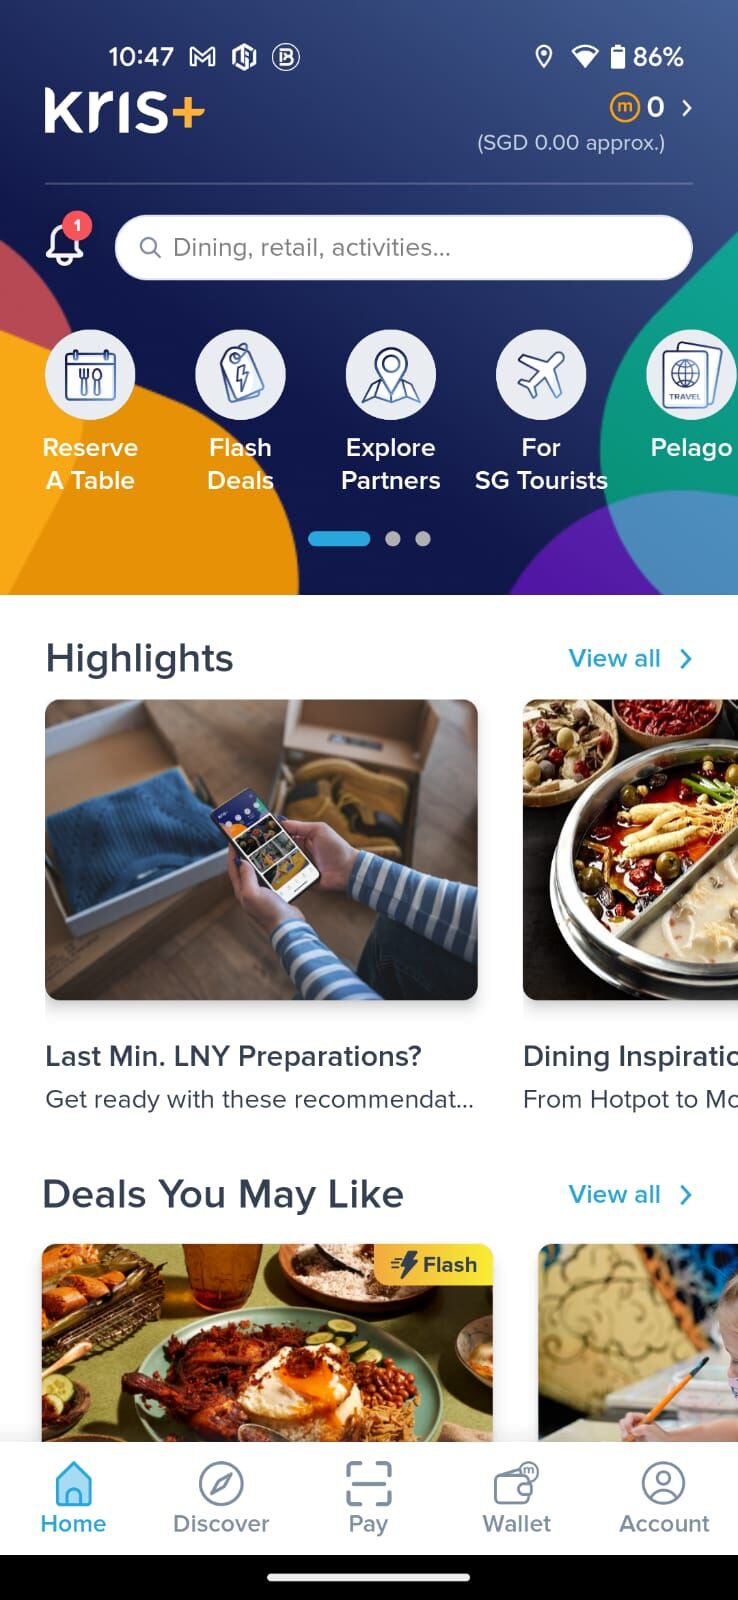 Kris+ Referral Code for 5 SGD worth KrisFlyer Miles Singapore Airlines